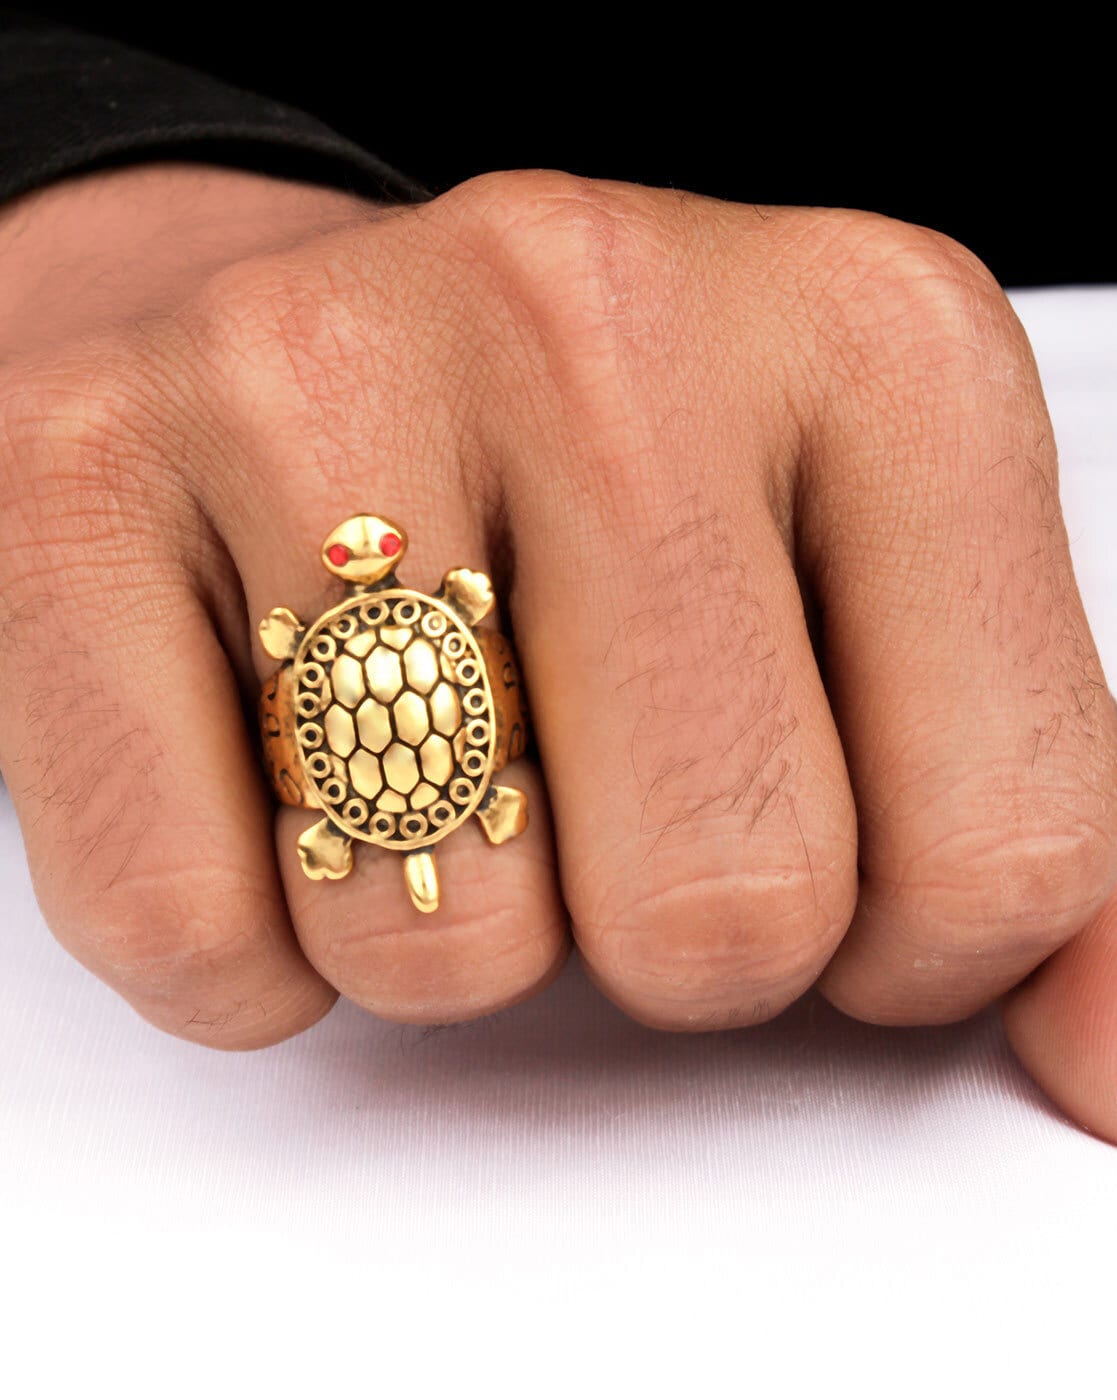 Rings | Tanishq Online Store